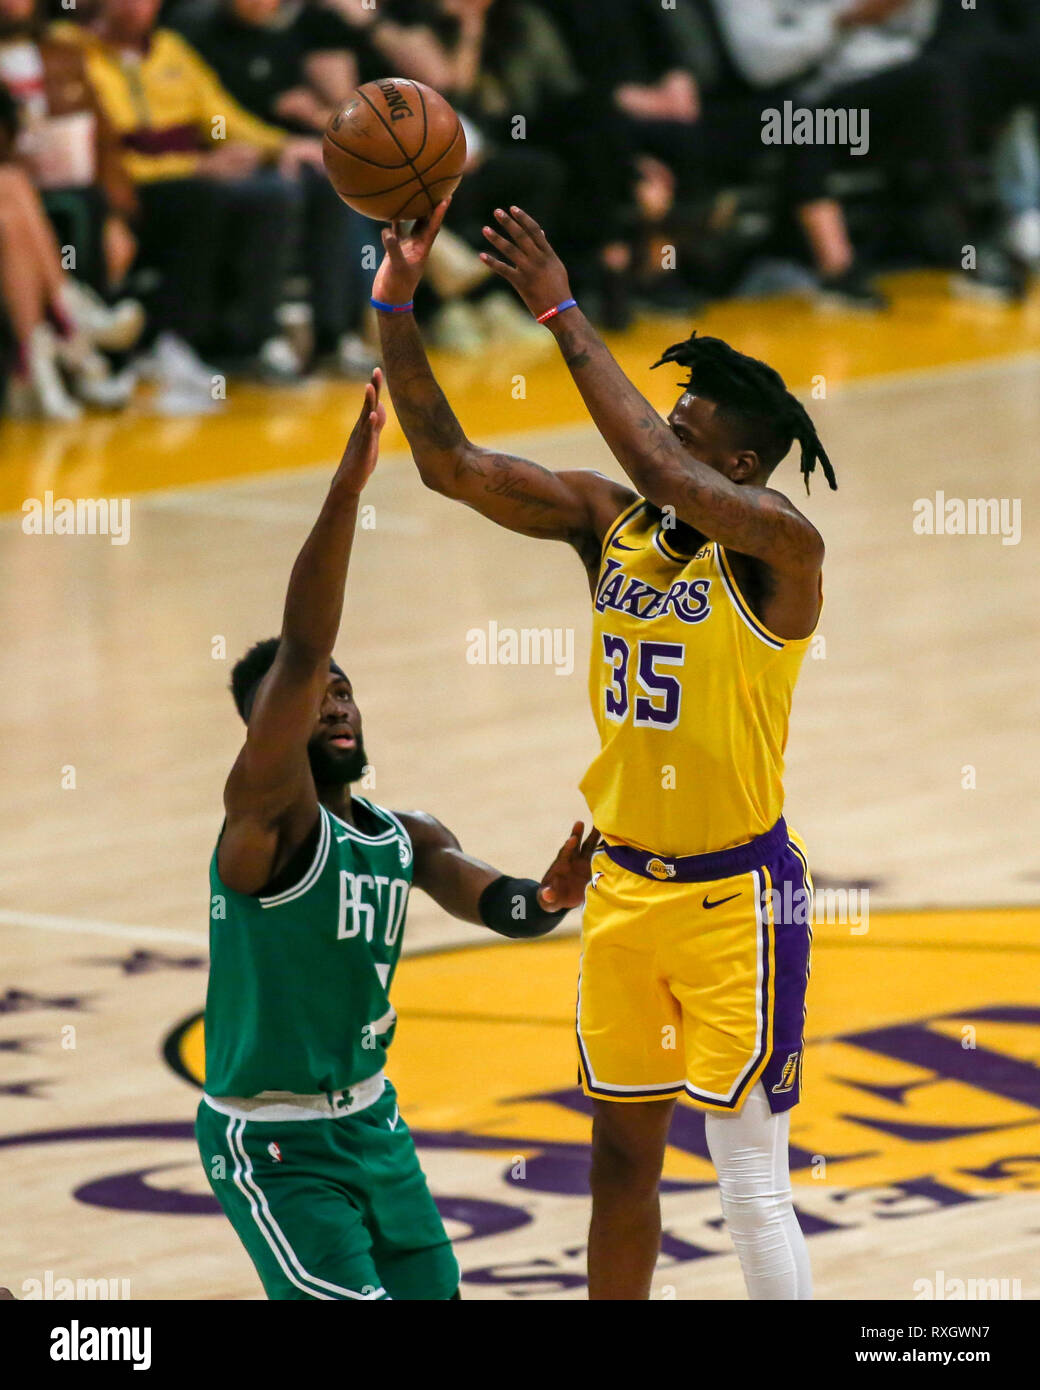 Los Angeles Lakers guard Reggie Bullock #35 during the Boston Celtics vs Los Angeles Lakers game at Staples Center in Los Angeles, CA on March 09, 2019. (Photo by Jevone Moore) Stock Photo